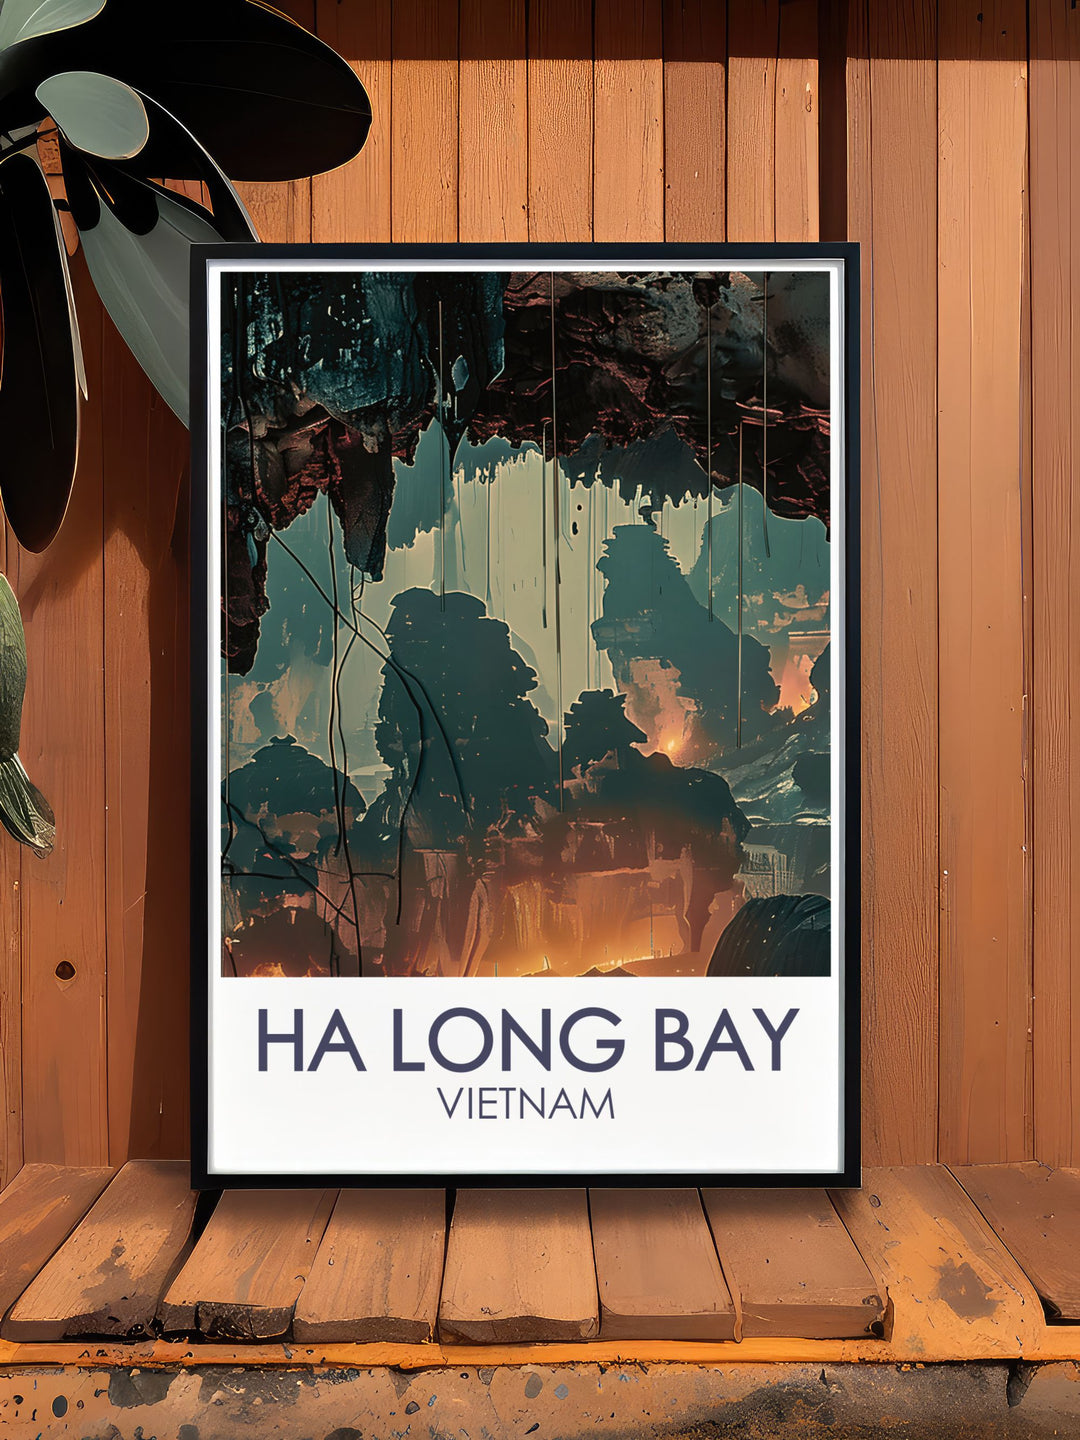 Featuring the stunning Surprising Cave in Ha Long Bay, this art print highlights the intricate stalactites and stalagmites of one of Vietnams most impressive natural wonders.